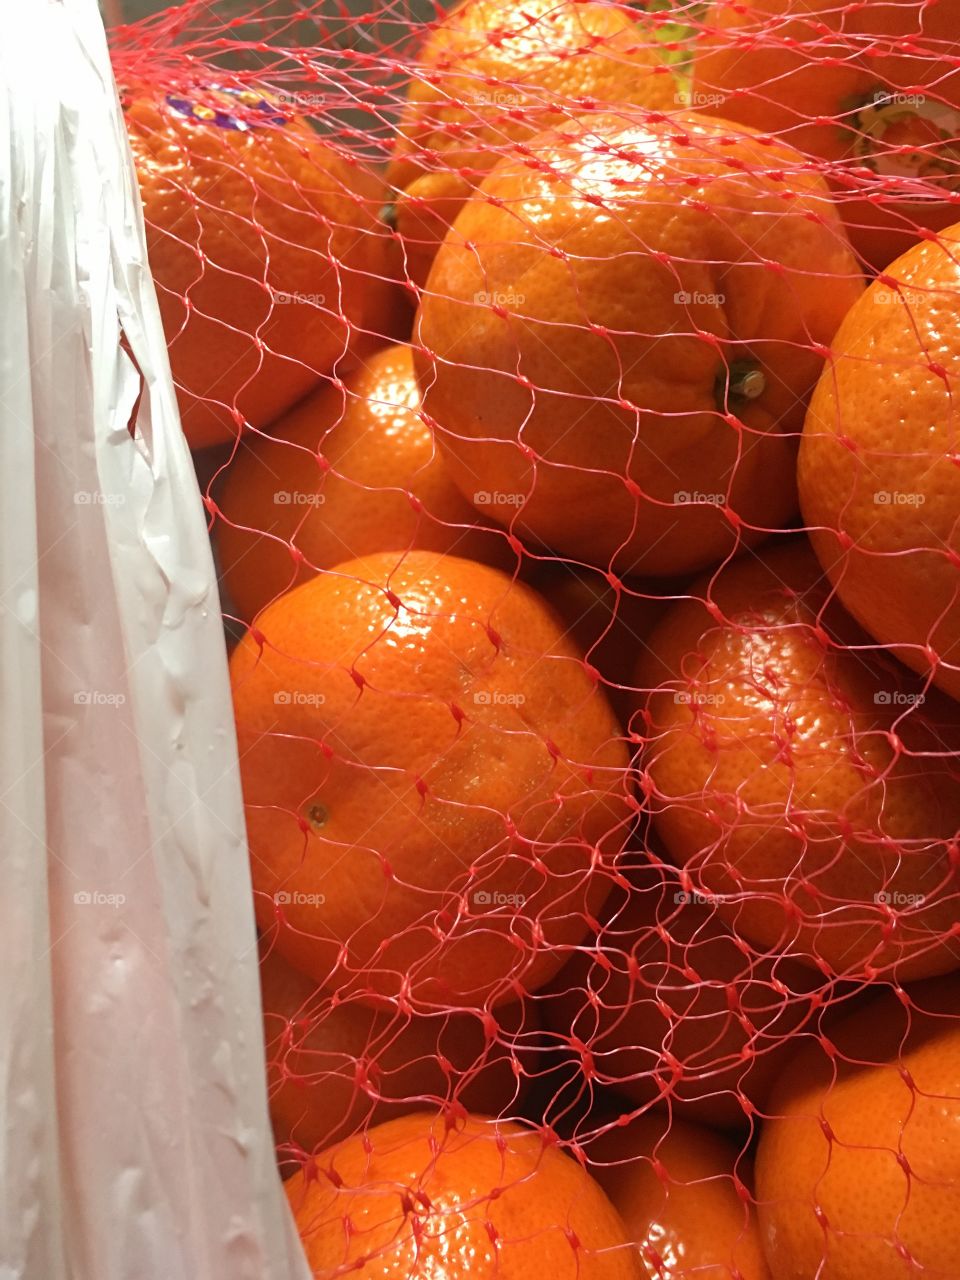 Oranges in netting compared my home from a shopping trip.  